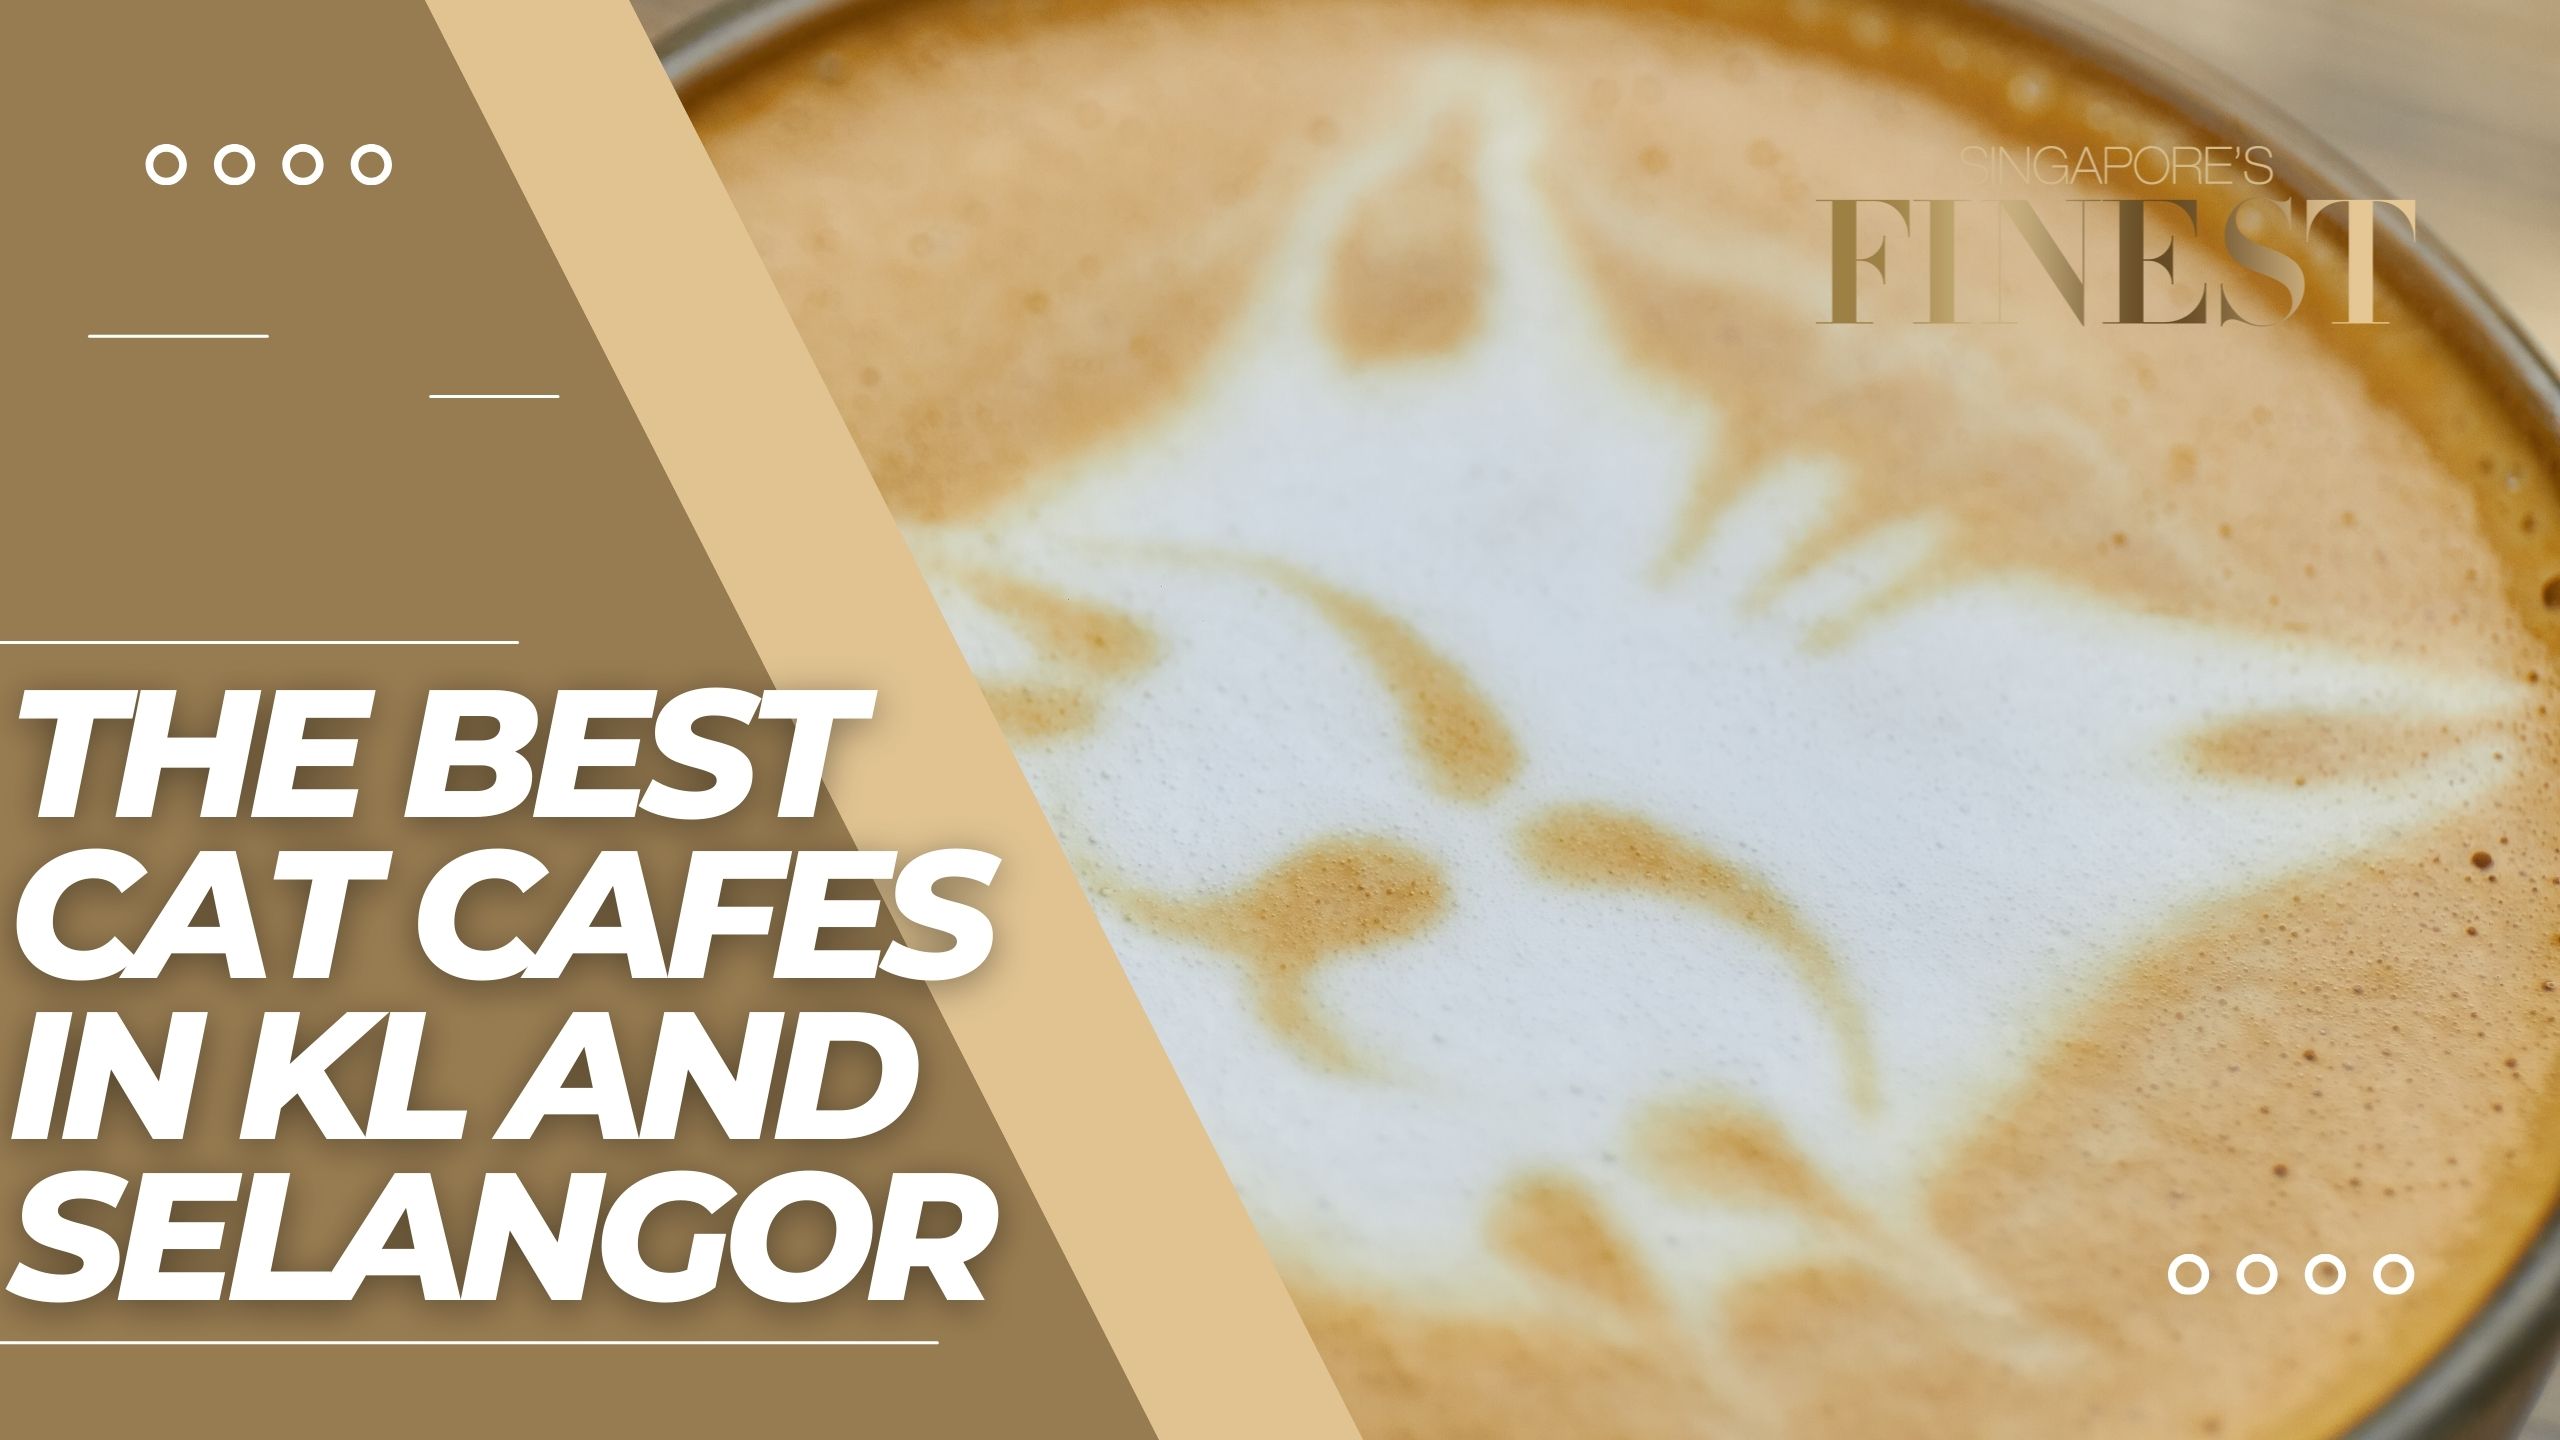 The Finest Cat Cafes in KL and Selangor